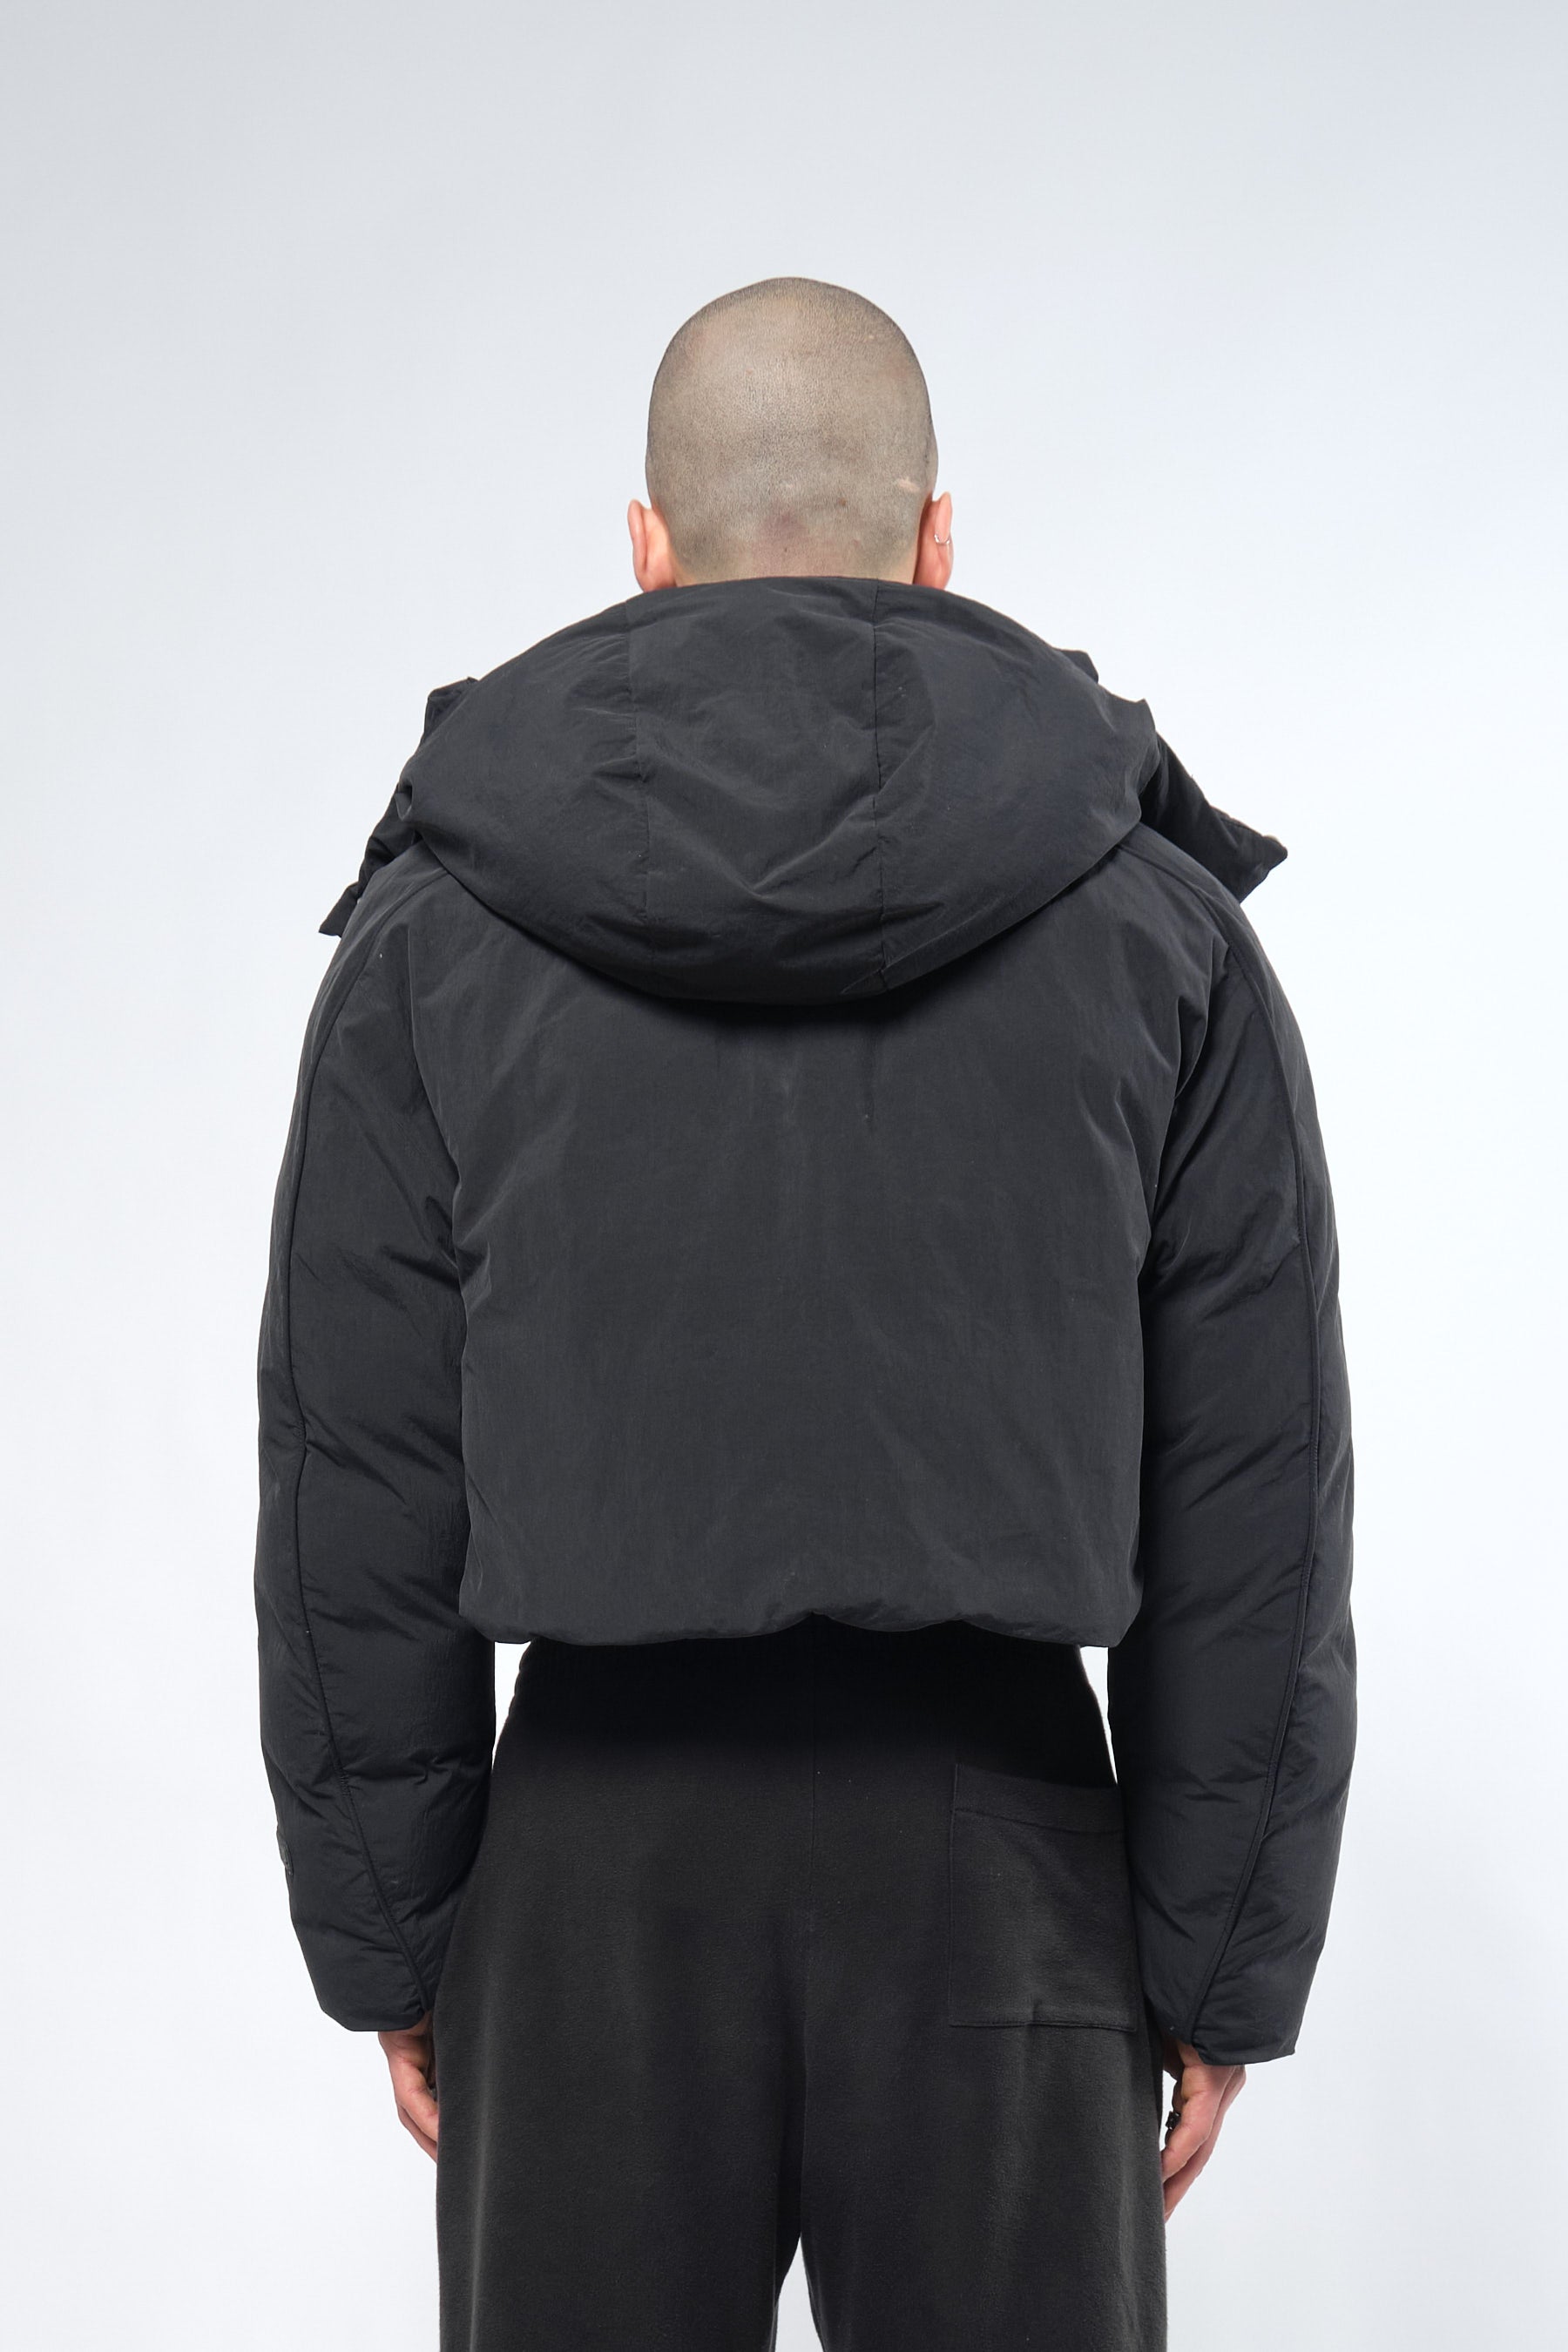  Re:Down® Crop Black Puffer Jacket with Hood - Adhere To  - 7